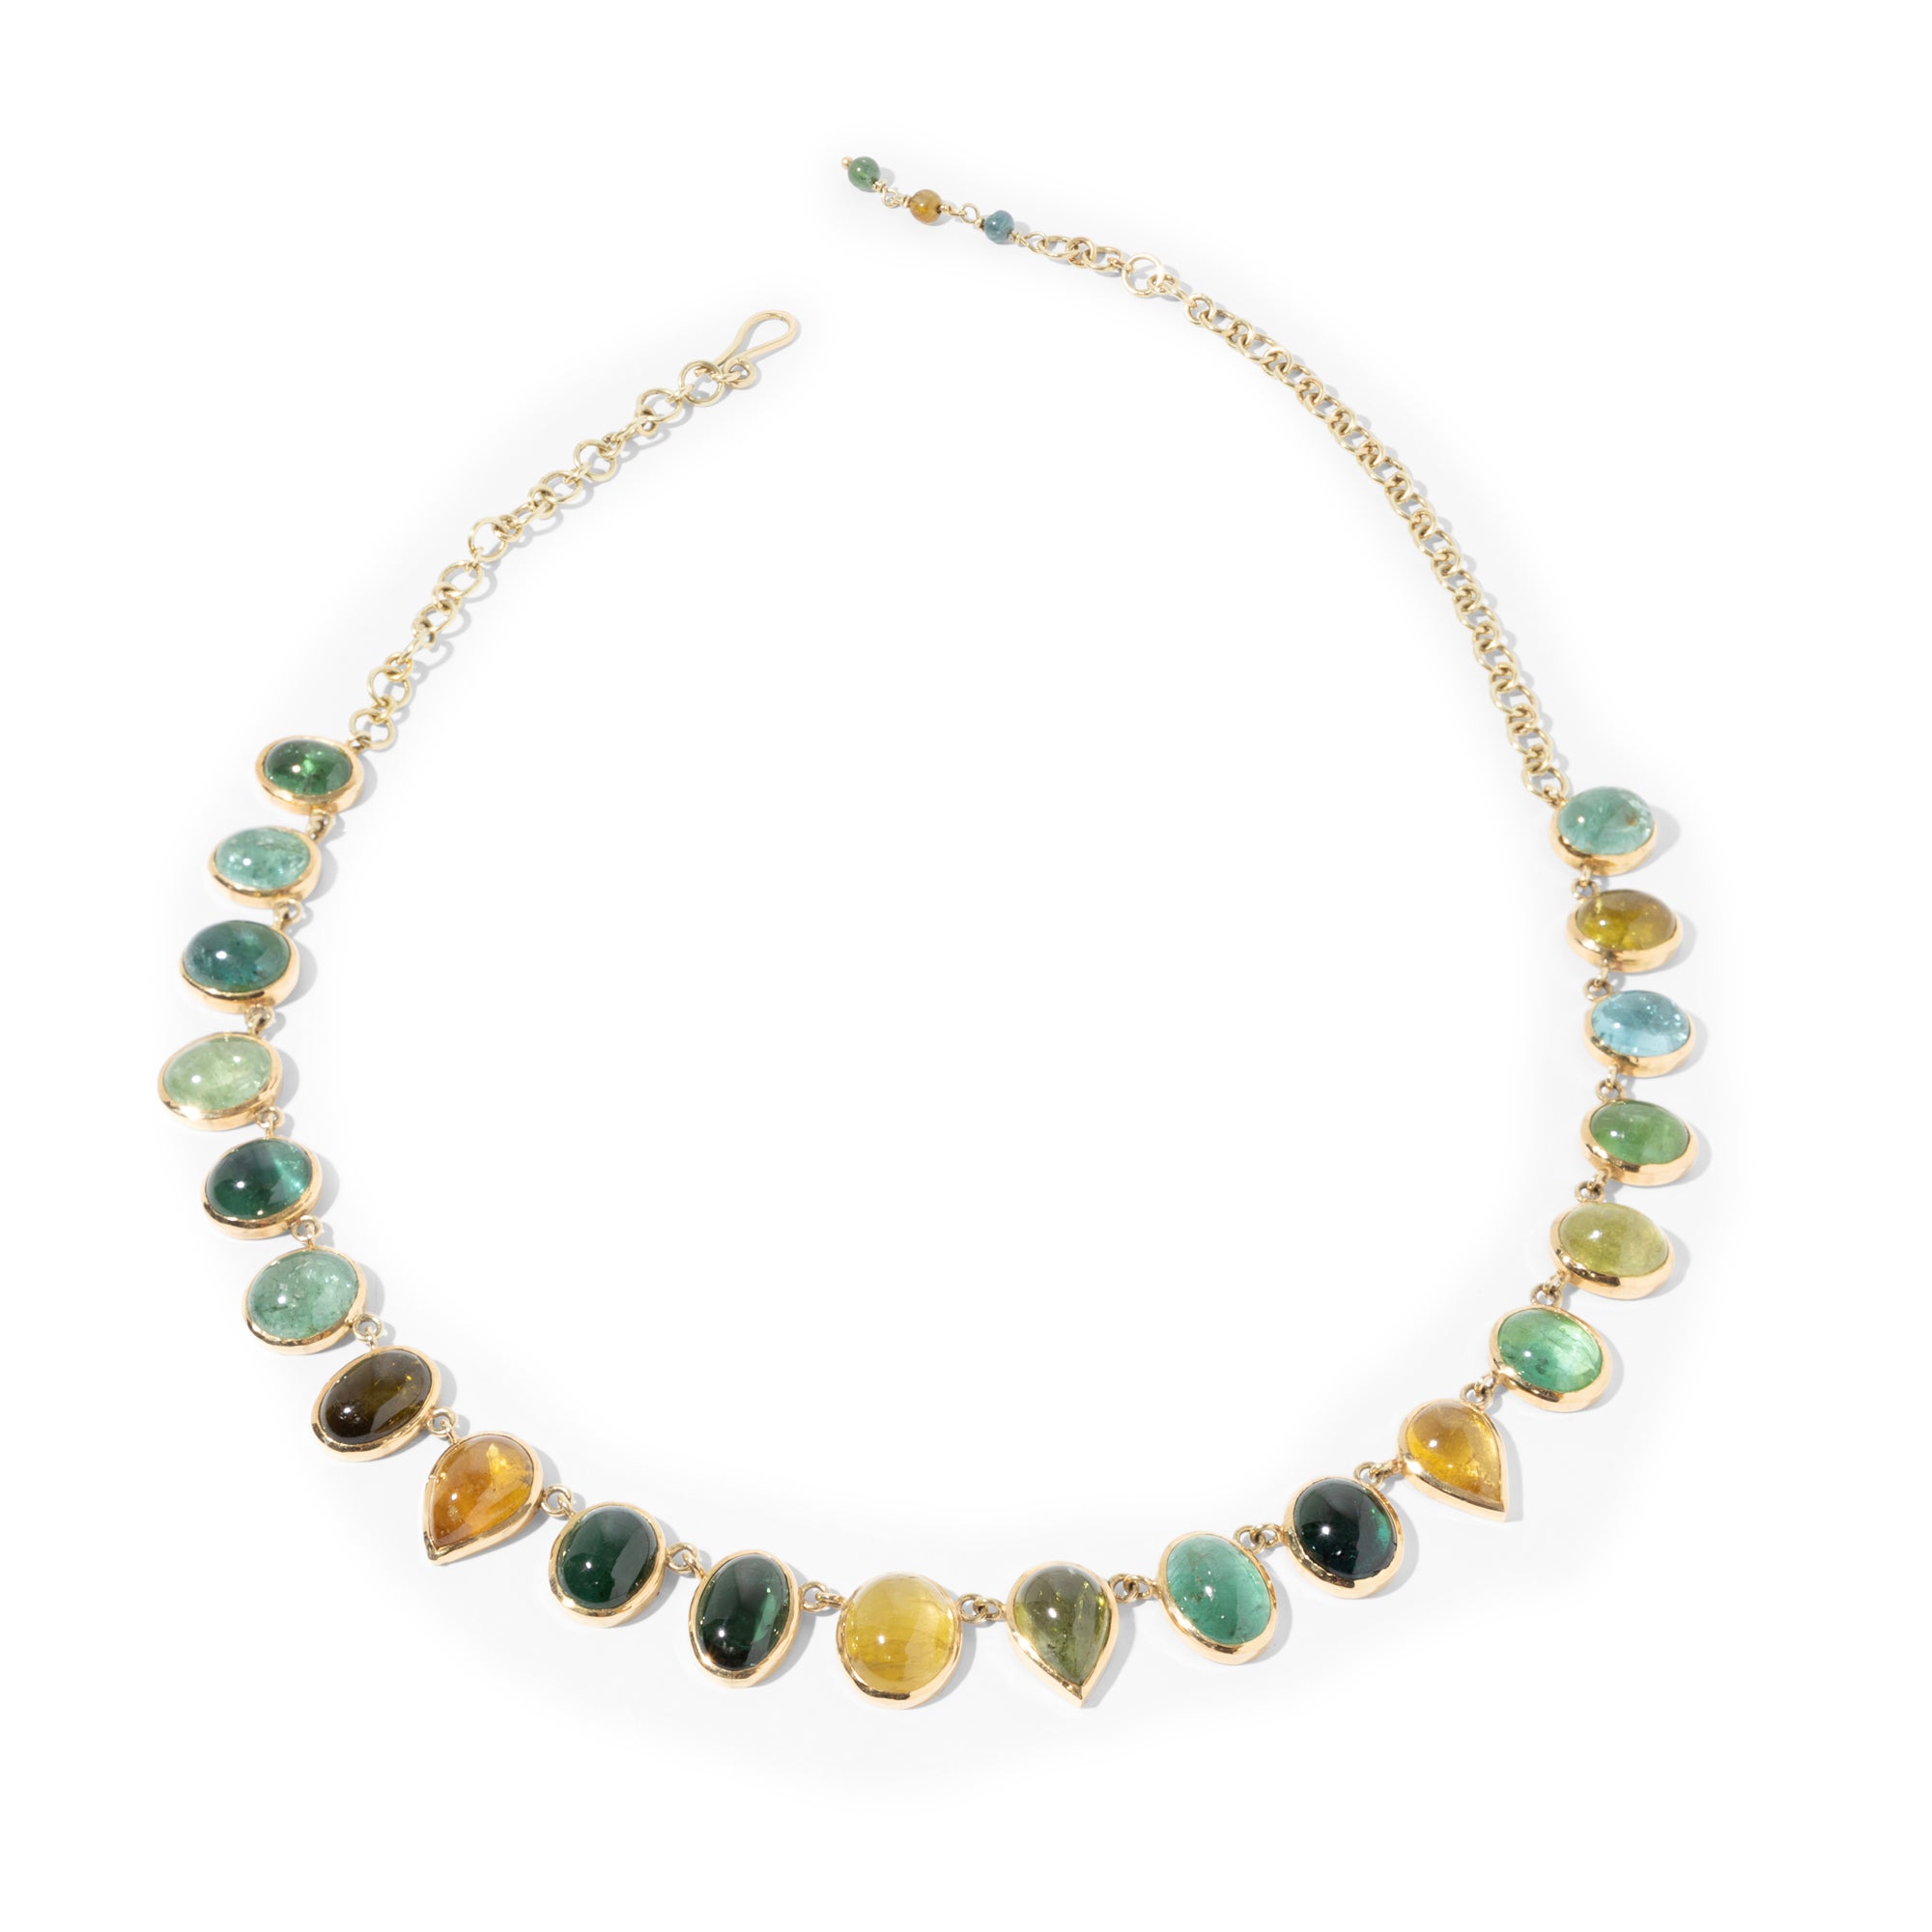 One-of-a-kind Handcrafted 18kt Gold Multi-Colour Tourmaline Necklace